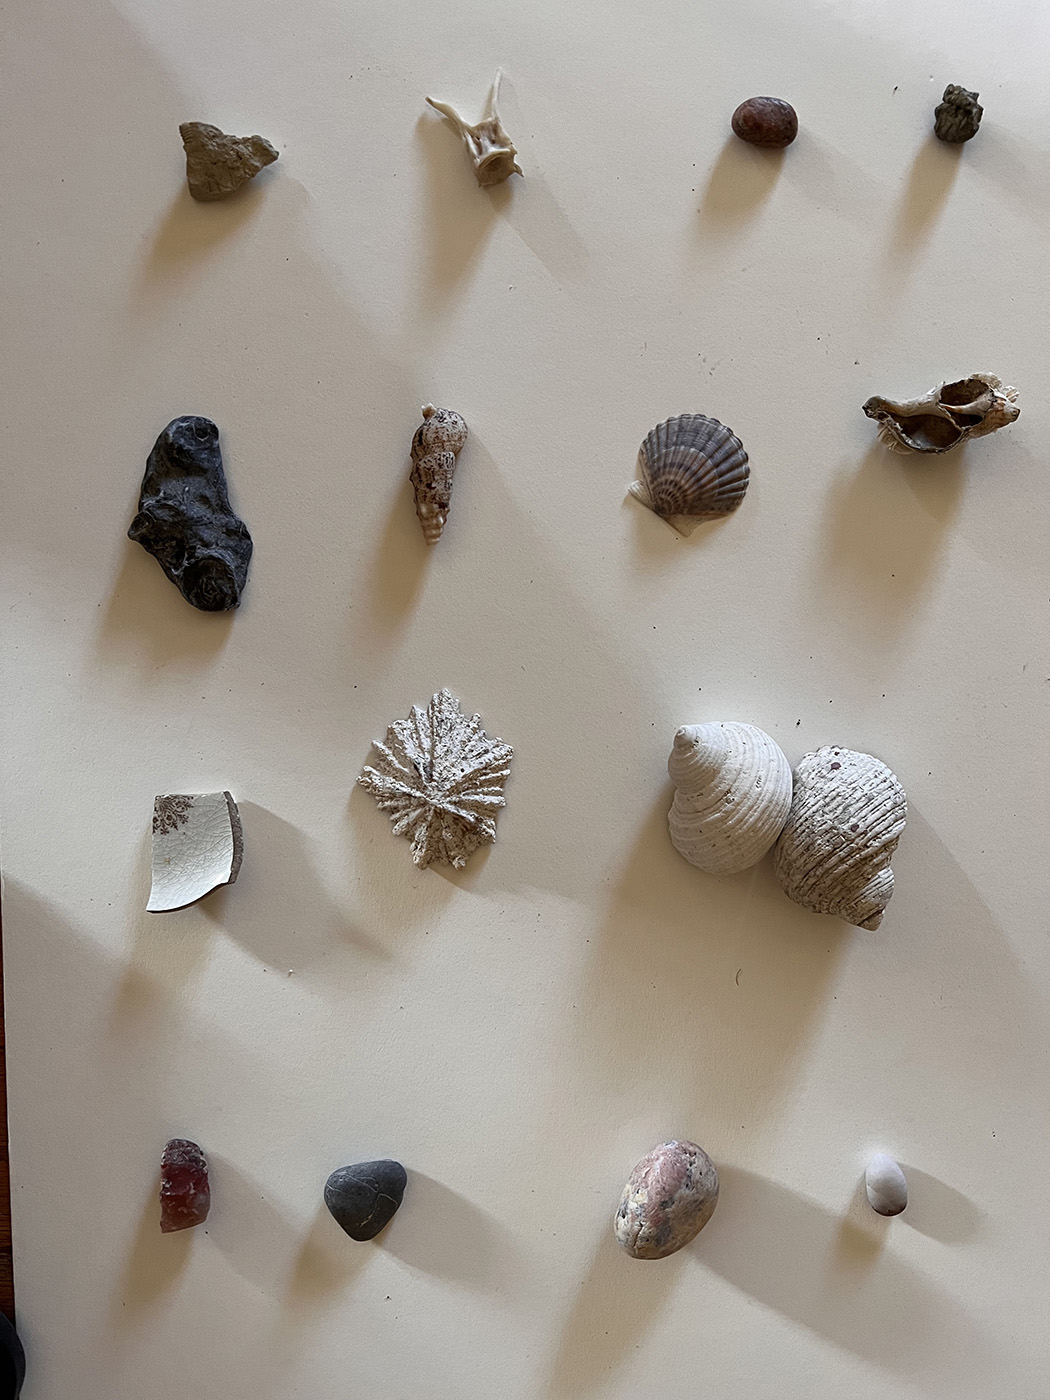  from the (What You Carry) Series (Internal Spaces), 2022 Found Objects: My first ever trilobite! (Ut), Fish bone (NC), rock (Denmark), Pyrite (Co) Shells (Va, Thailand, Denmark, Denmark) Pottery (Co), Limpet (Thailand), Shells (Ca, Denmark) Quartize (Oregon), Rock (Washington), Rock (Denmark), Rock (Germany)